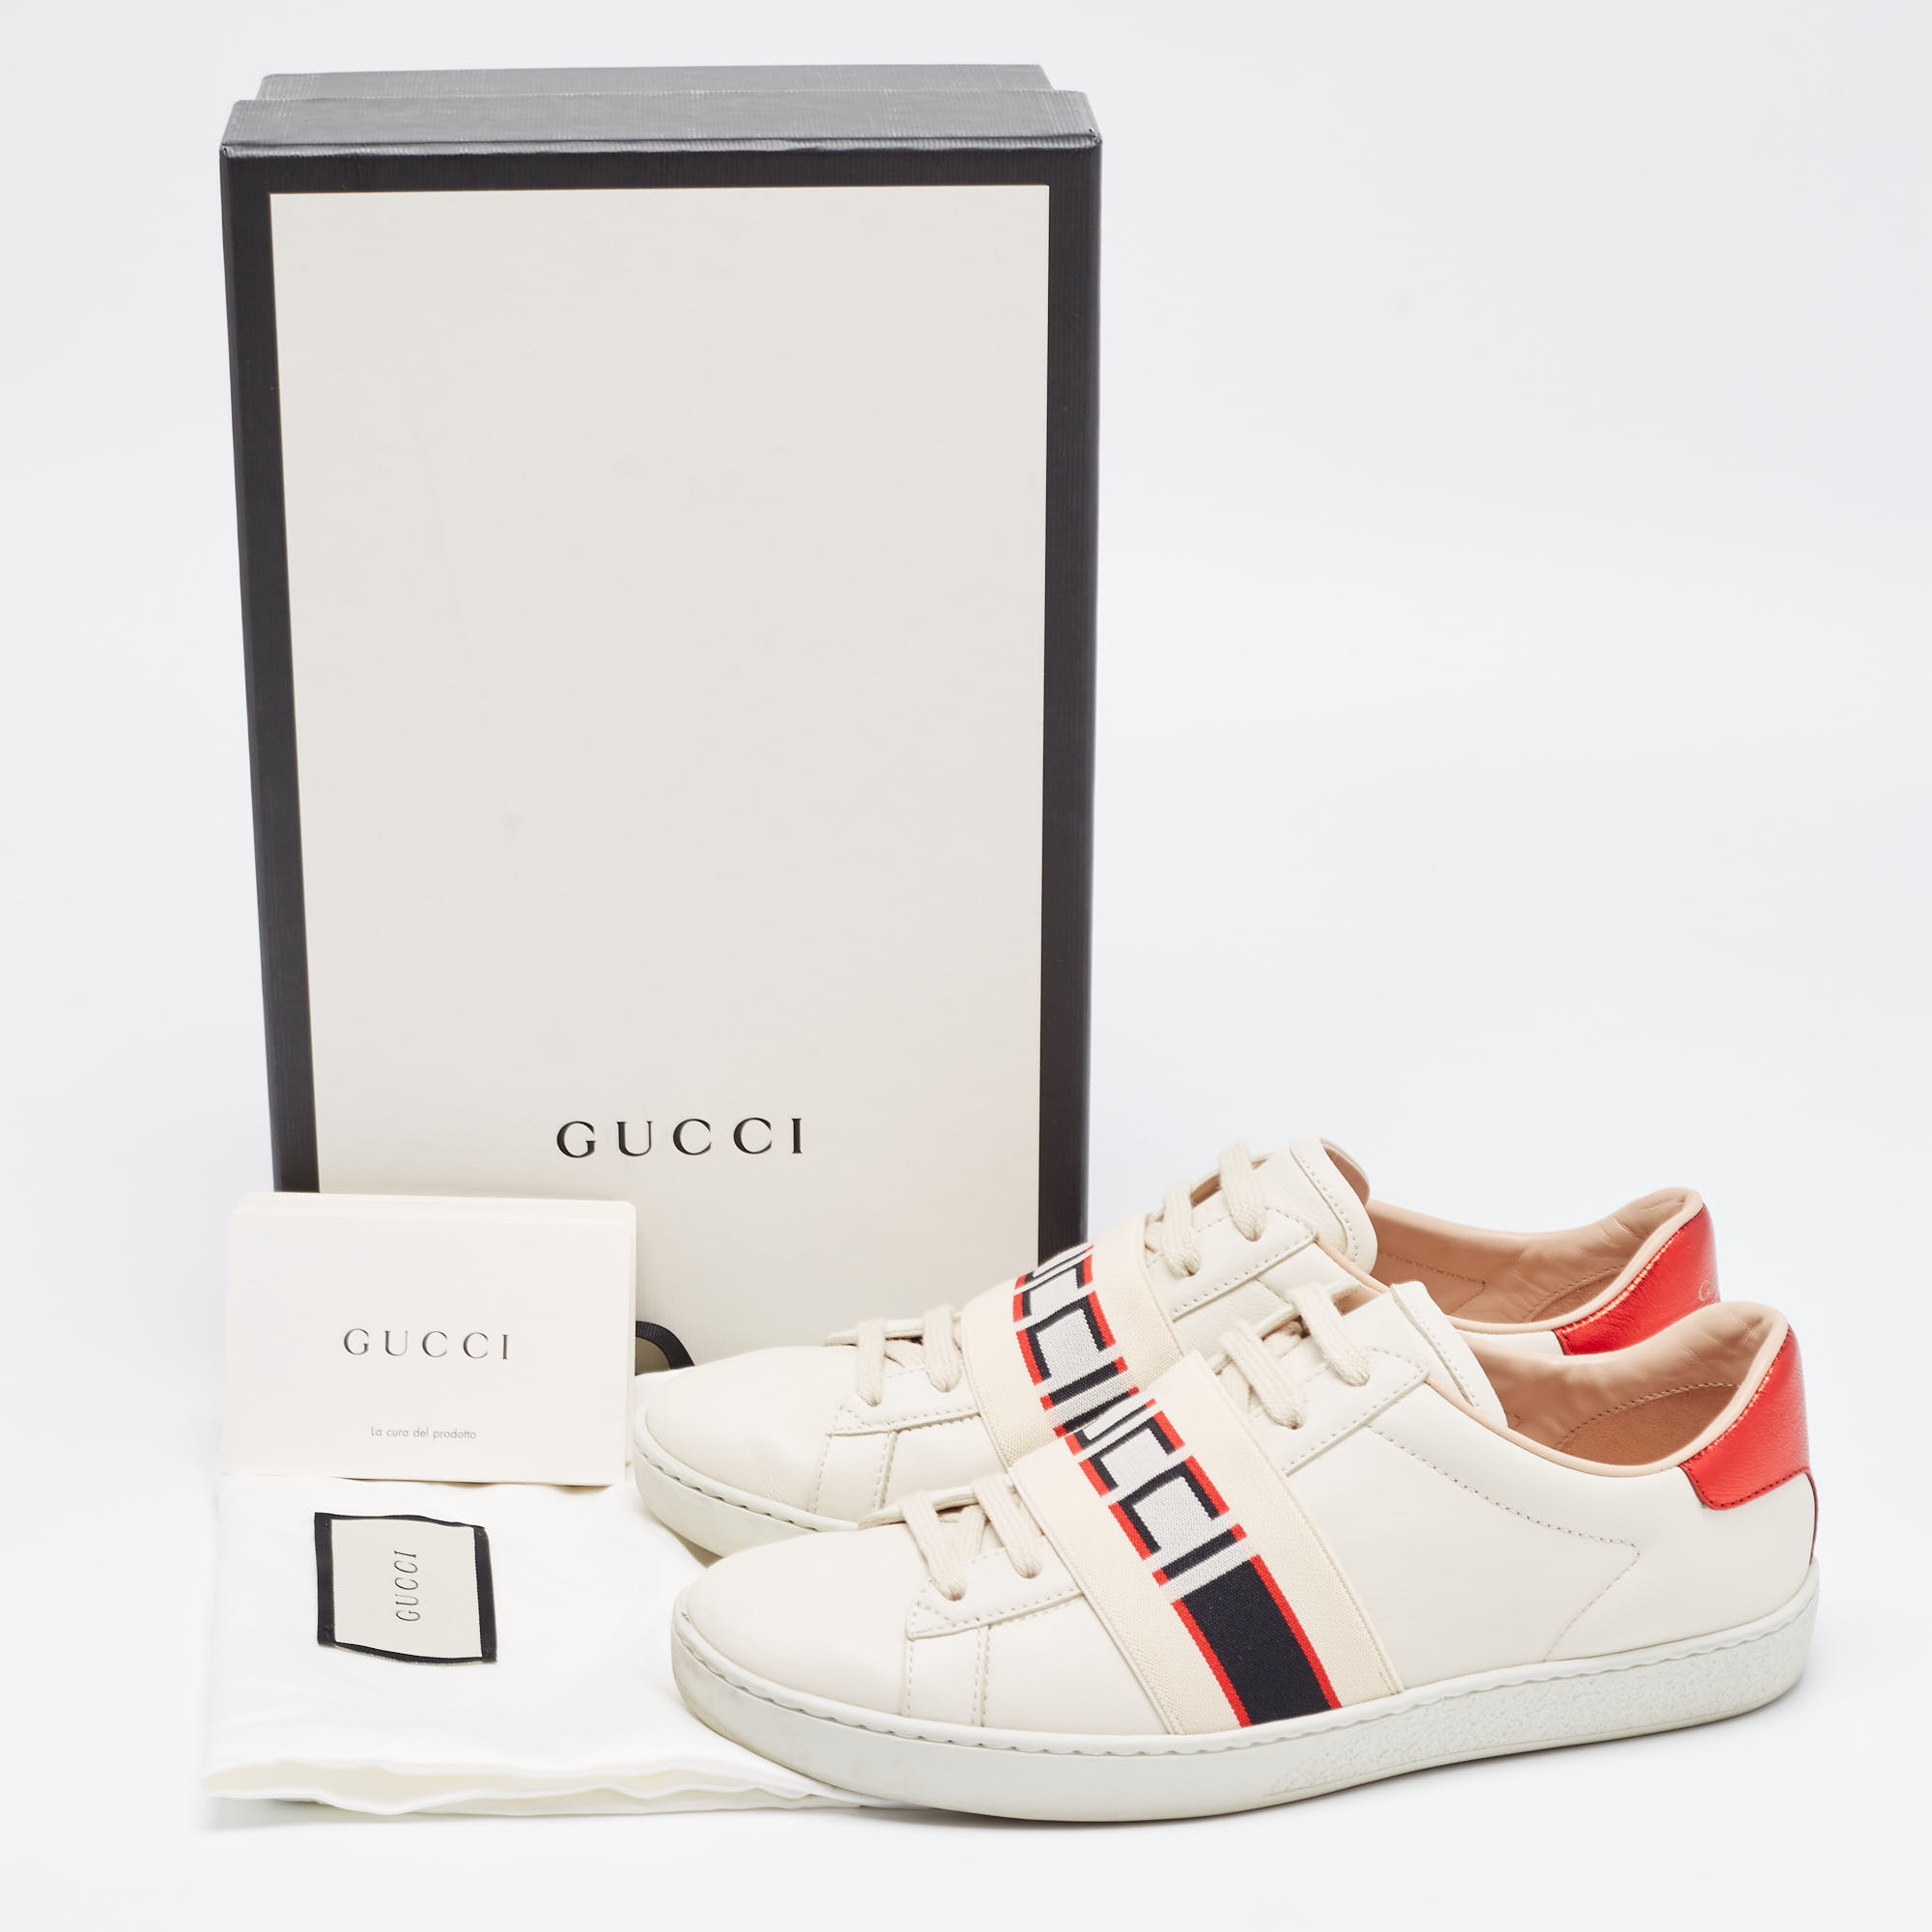 Gucci Cream/Red Leather Ace Gucci Band Low Top Sneakers Size 37